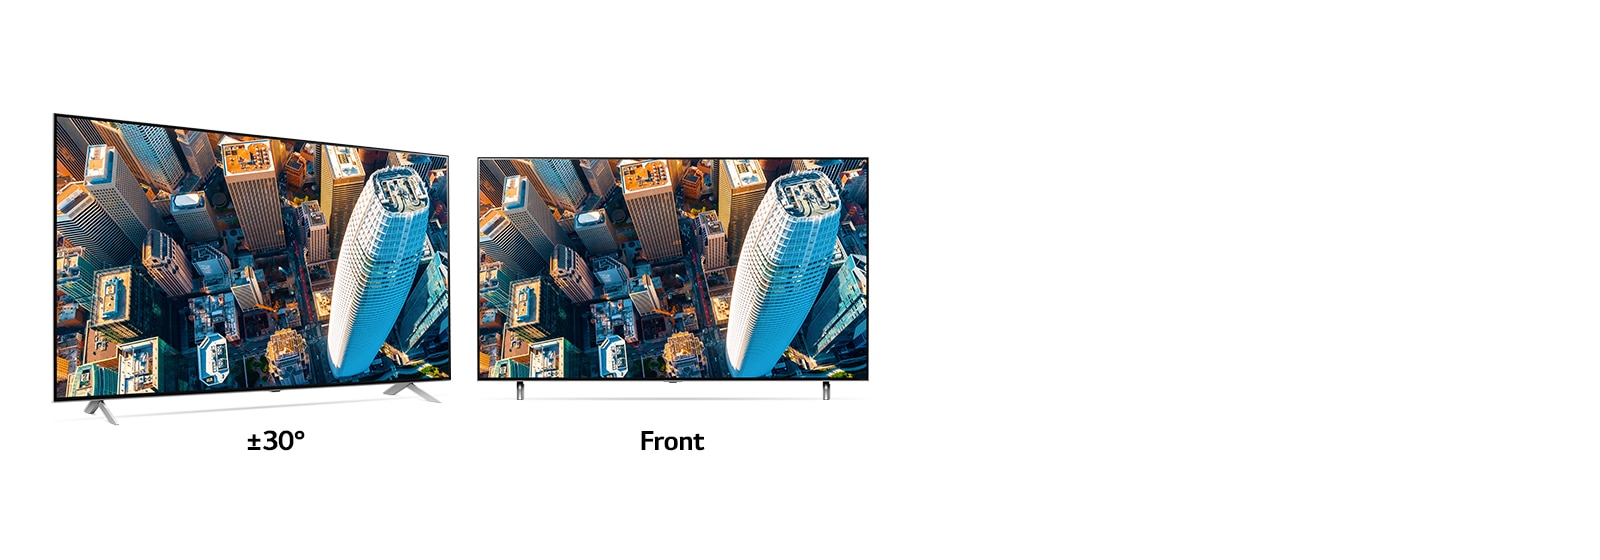 Top-down view of a city on two TV screens, the left showing the view from an angle and the right showing the same view front-on.